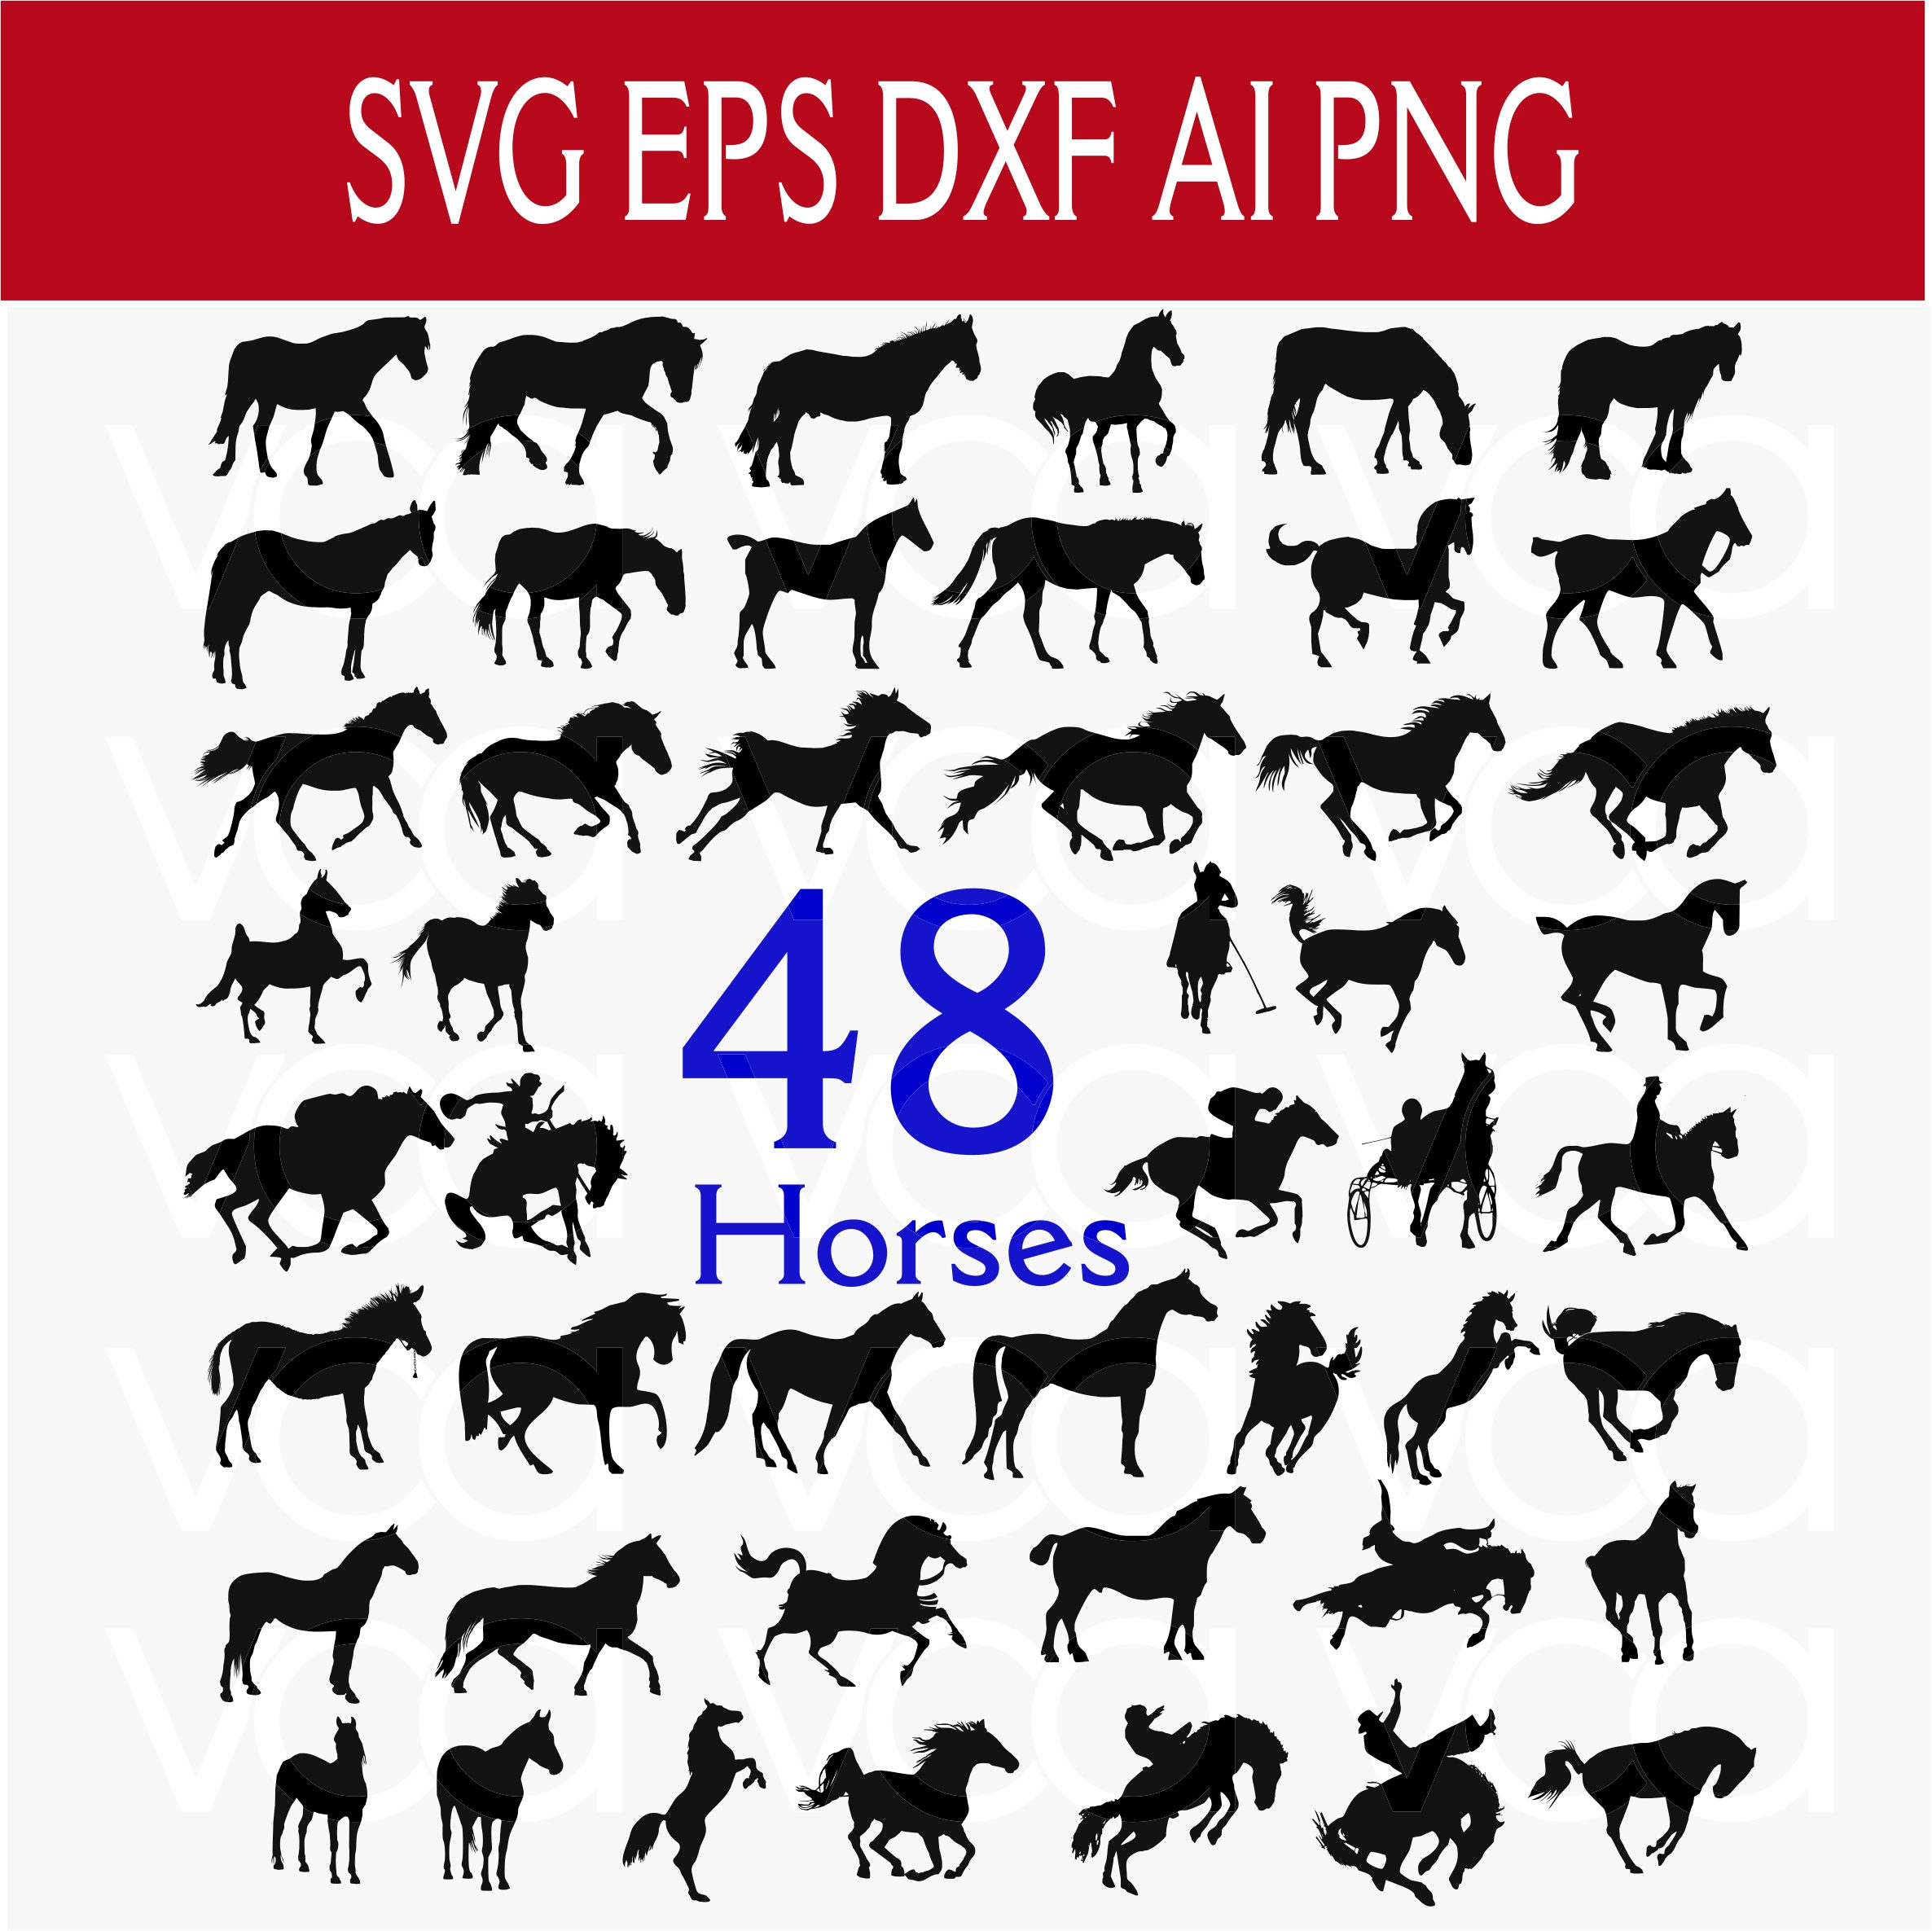 Cavallo svg #11, Download drawings